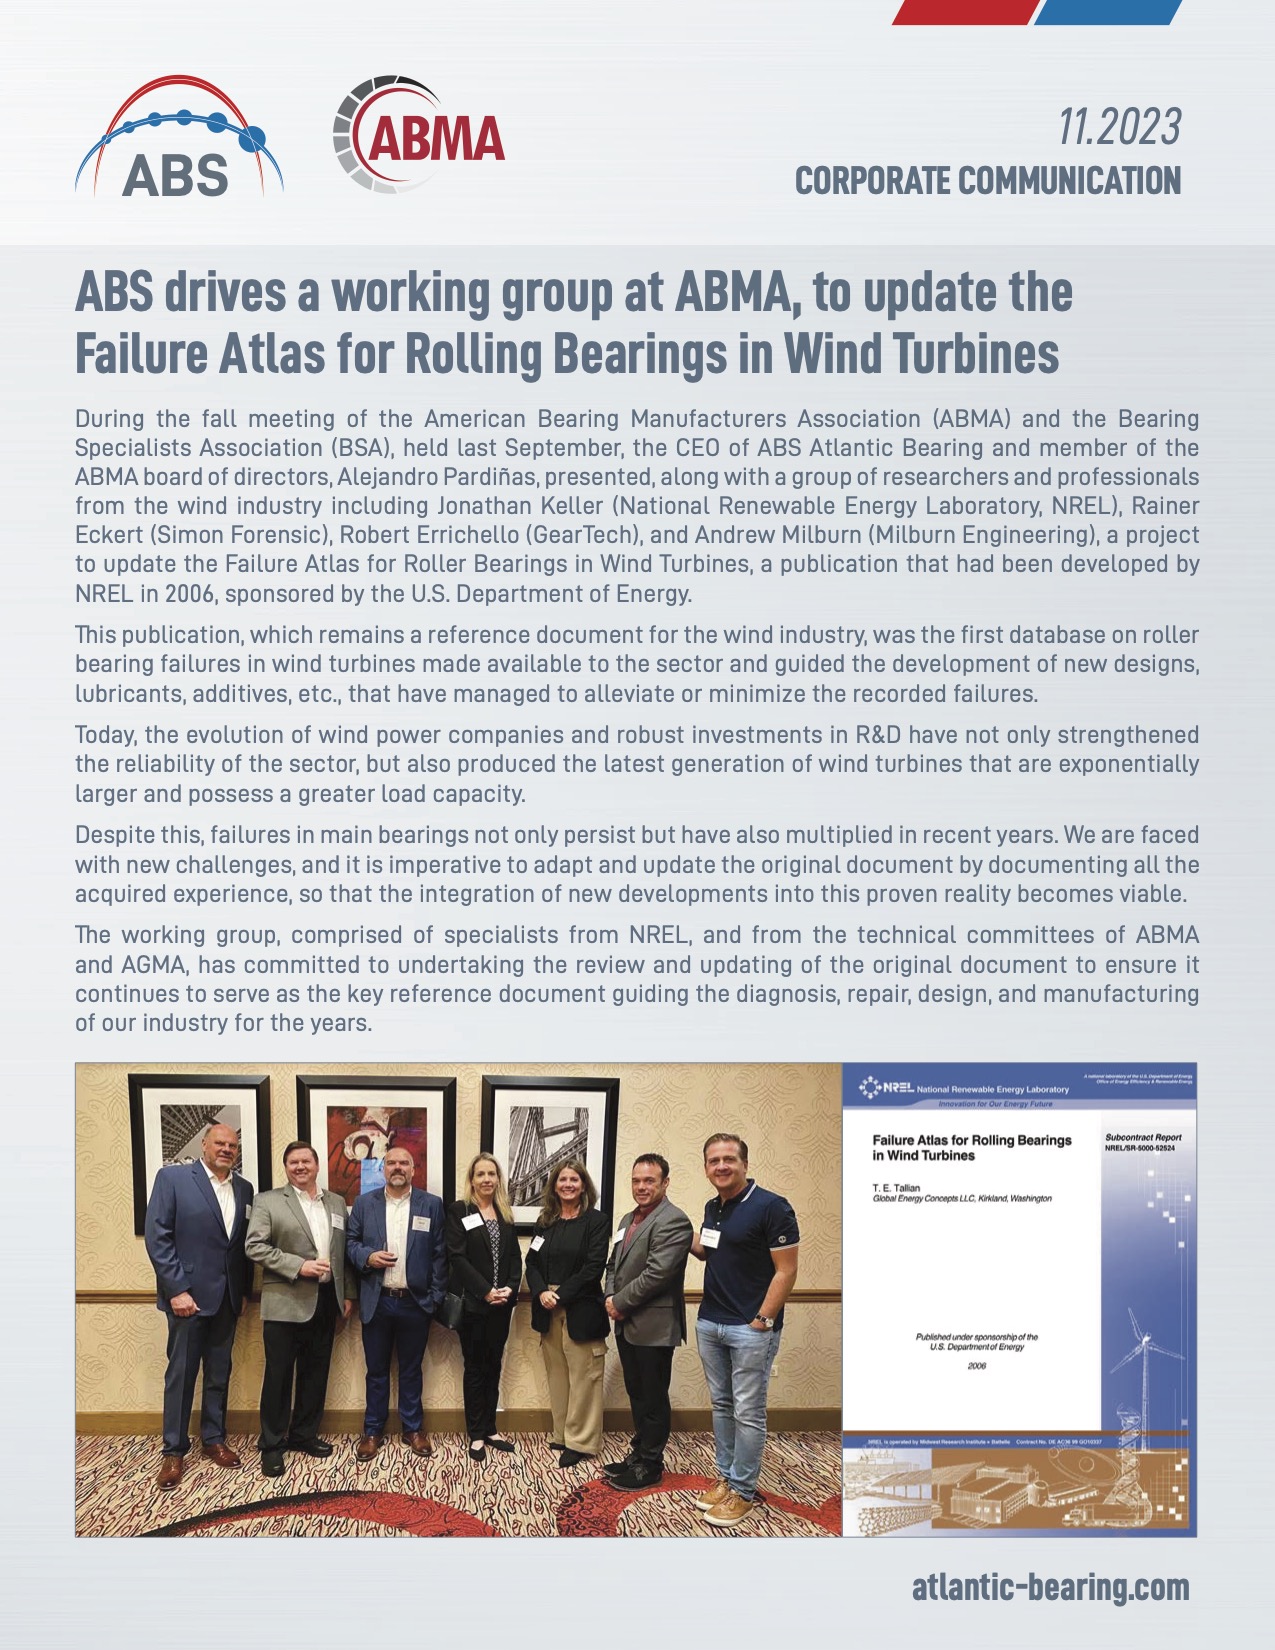 ABS drives a working group at ABMA, to update the Failure Atlas for Rolling Bearings in Wind Turbines